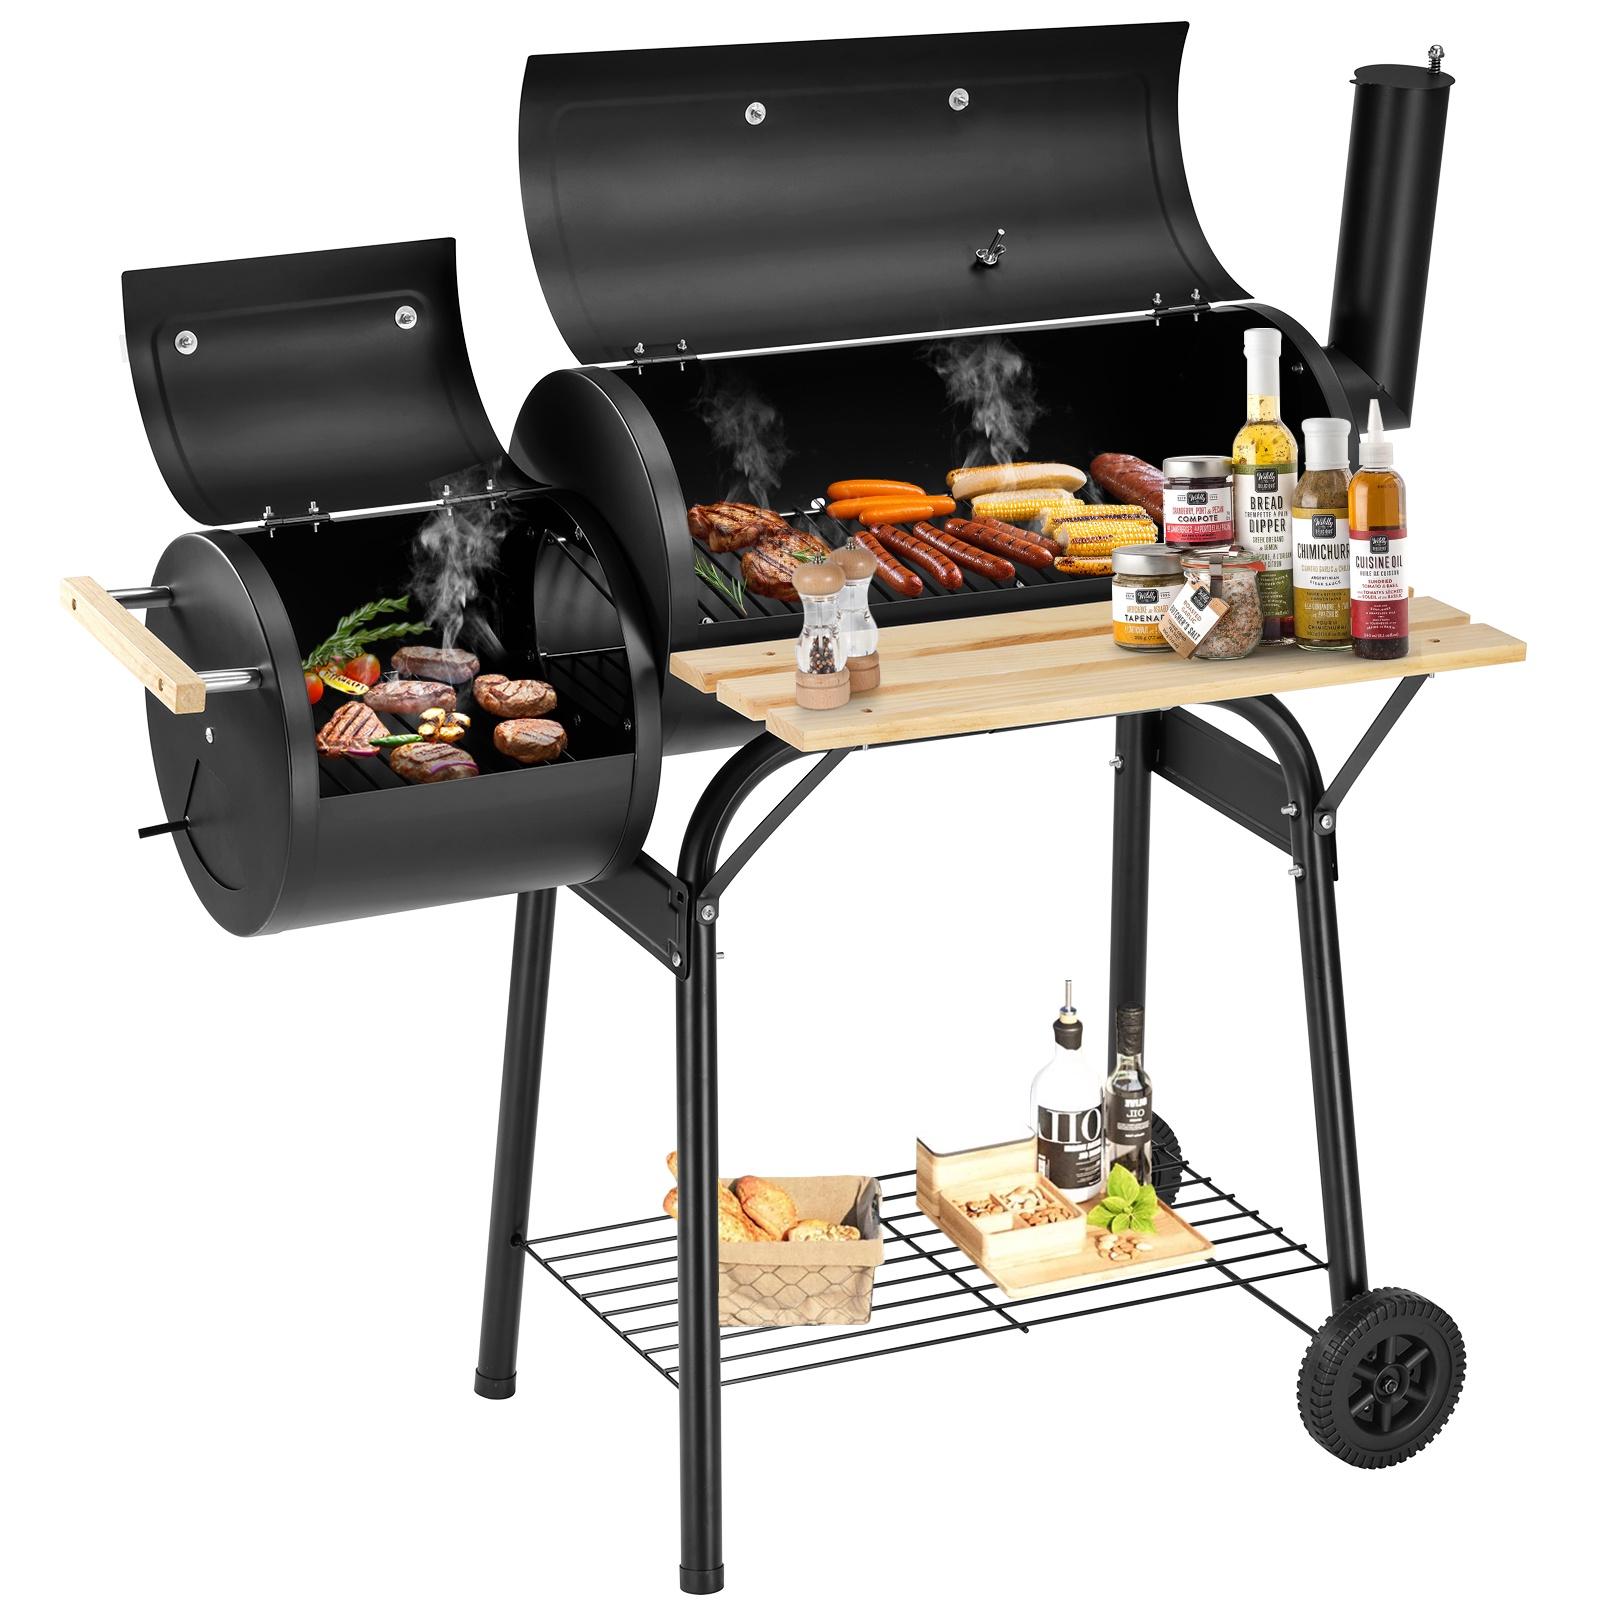 BBQ Charcoal Grill, 45.28-Inch Length Portable Barbecue Grill, Offset Smoker Barbecue Oven with Wheels & Thermometer for Outdoor Picnic Camping Patio Backyard, B026 - image 1 of 8